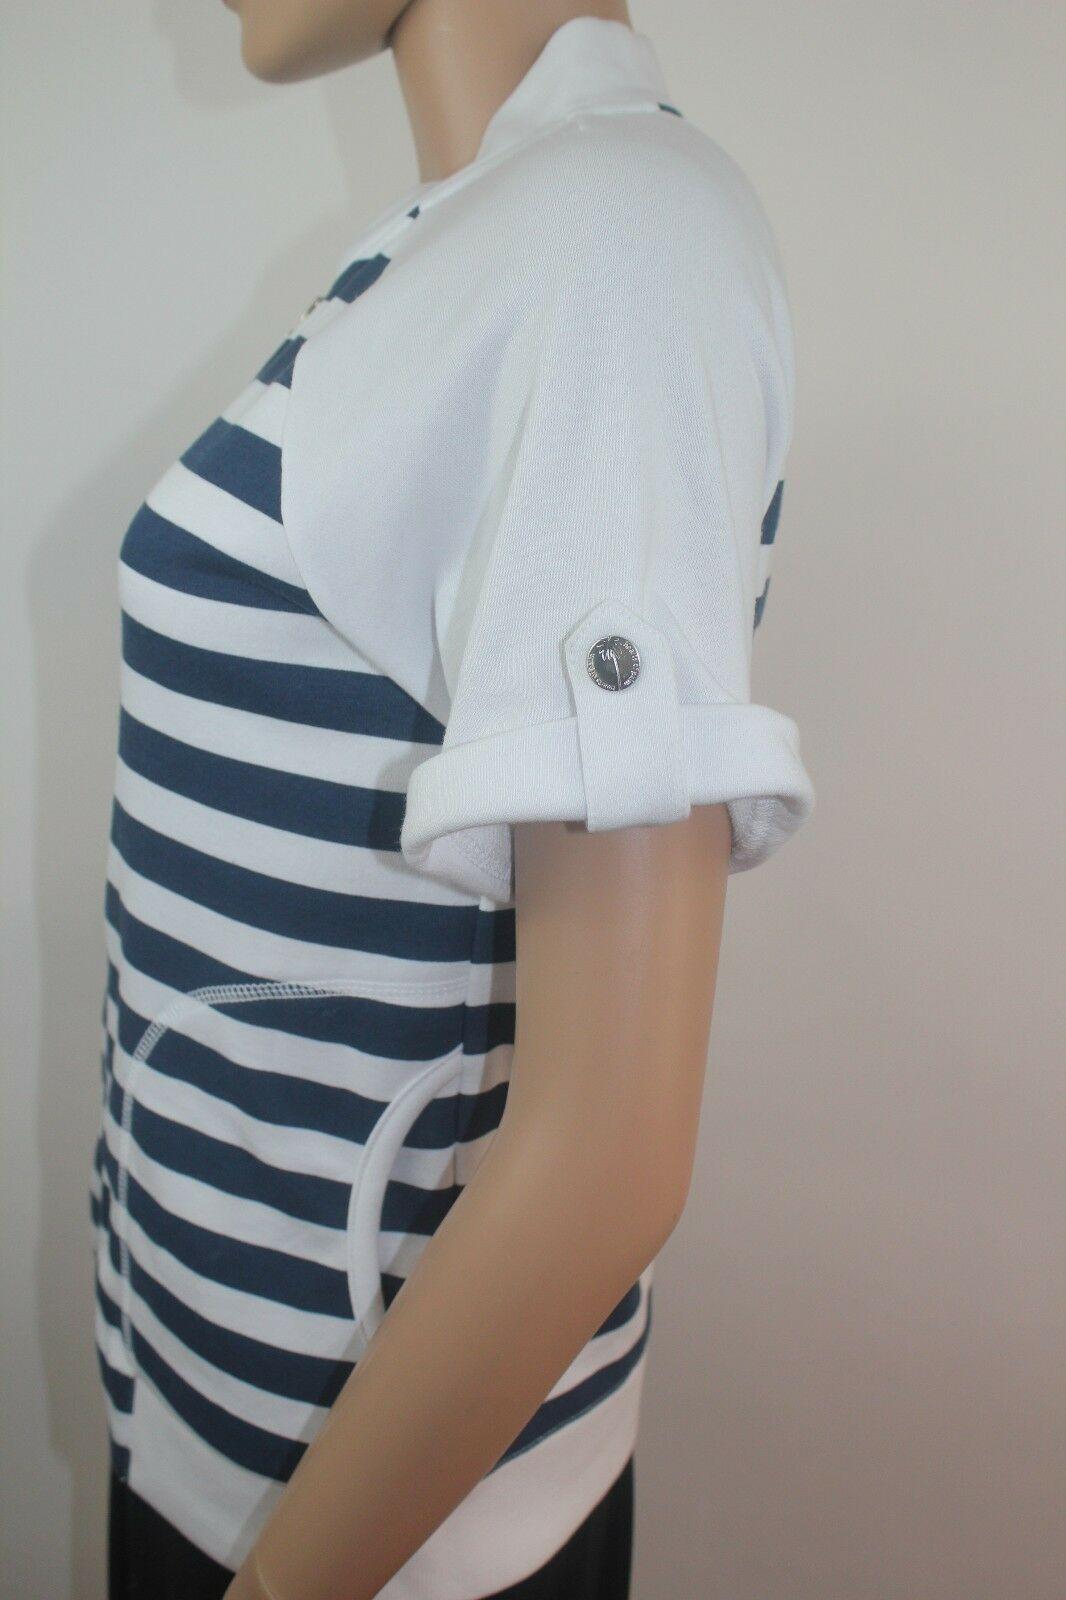 Hearts of Palm Womens Jacket Striped White and Blue Short Sleeve Size XS - SVNYFancy